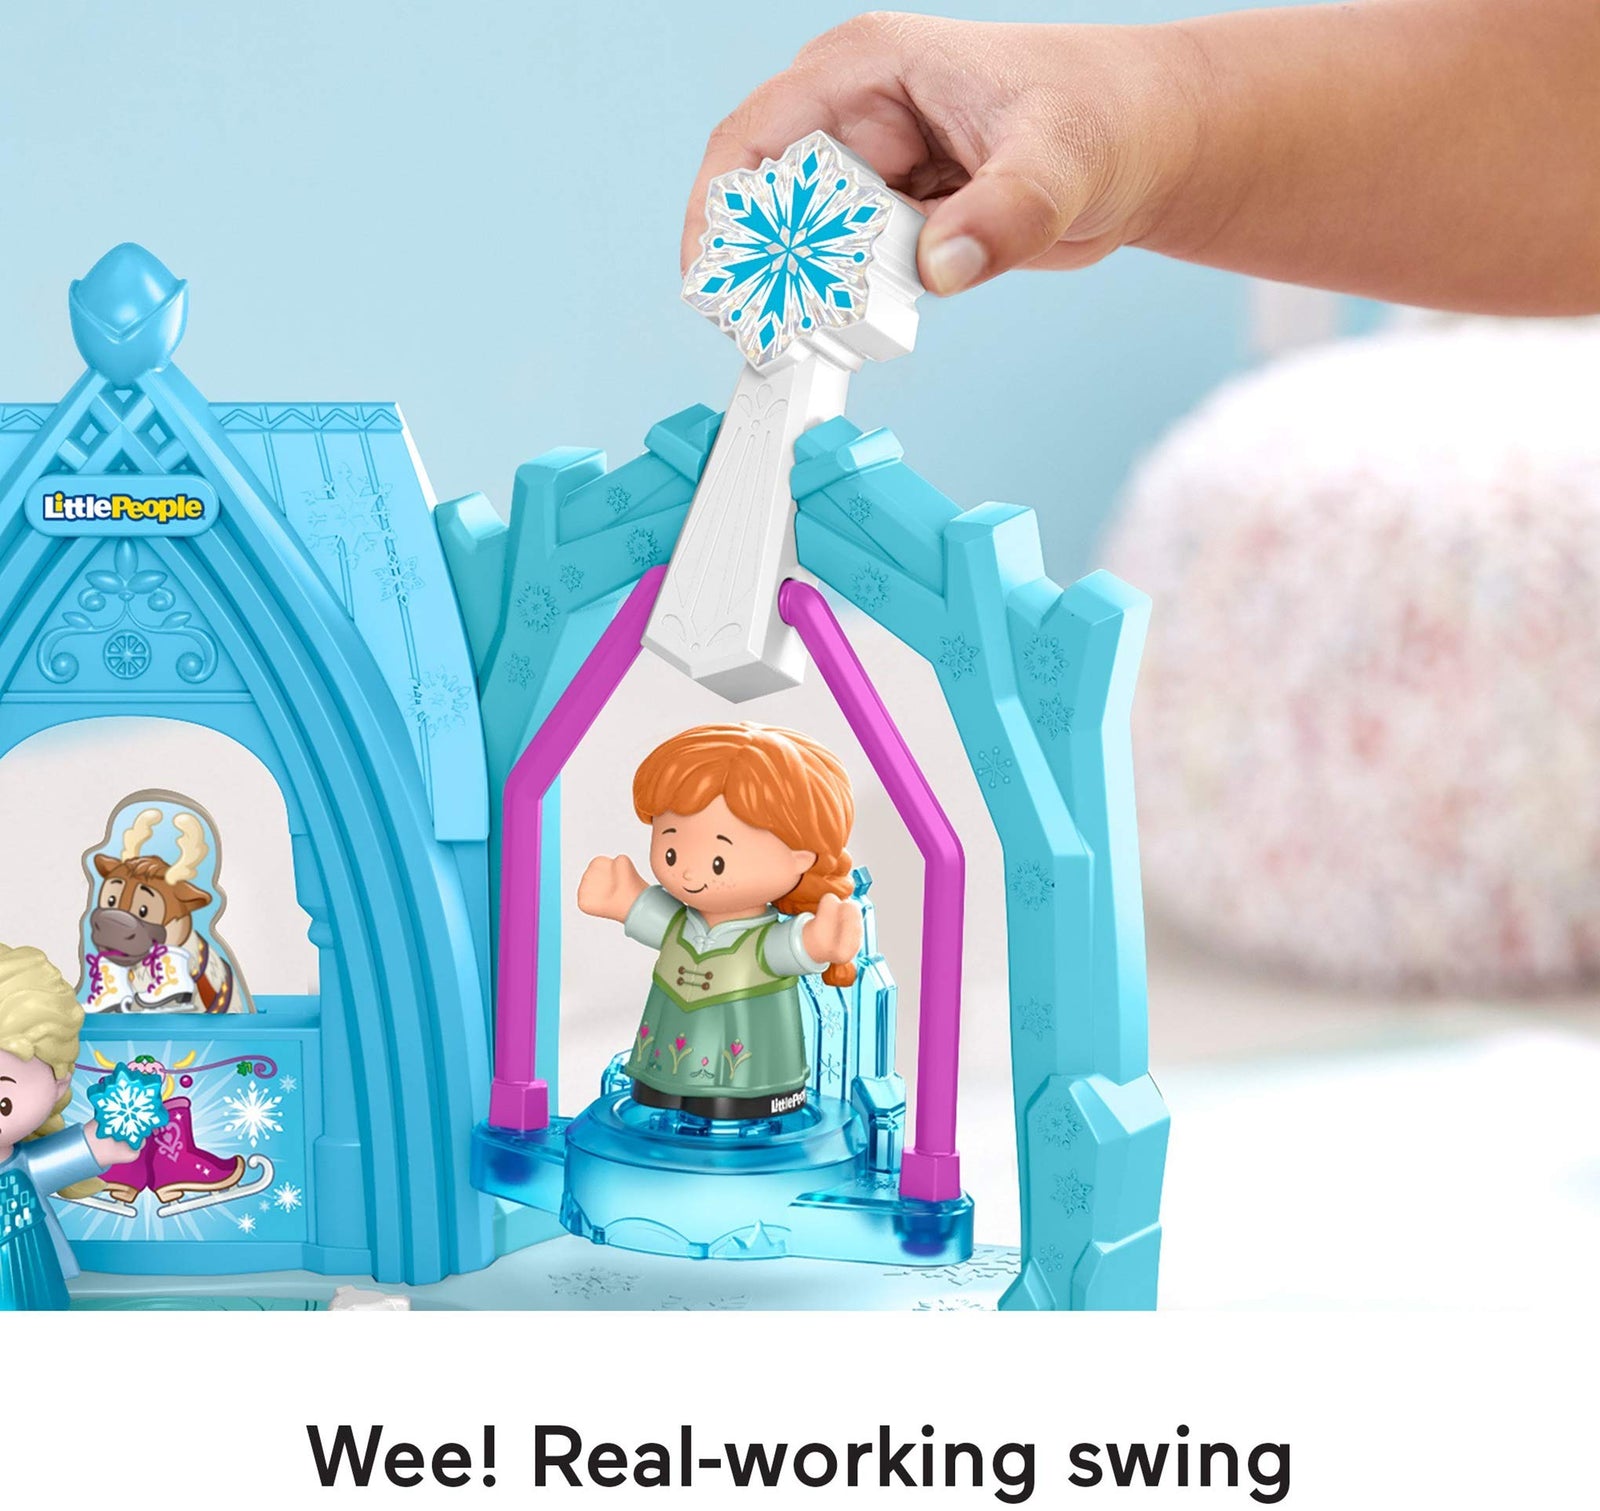 Disney Frozen Arendelle Winter Wonderland by Little People, ice skating playset with Anna and Elsa figures for toddlers and preschool kids